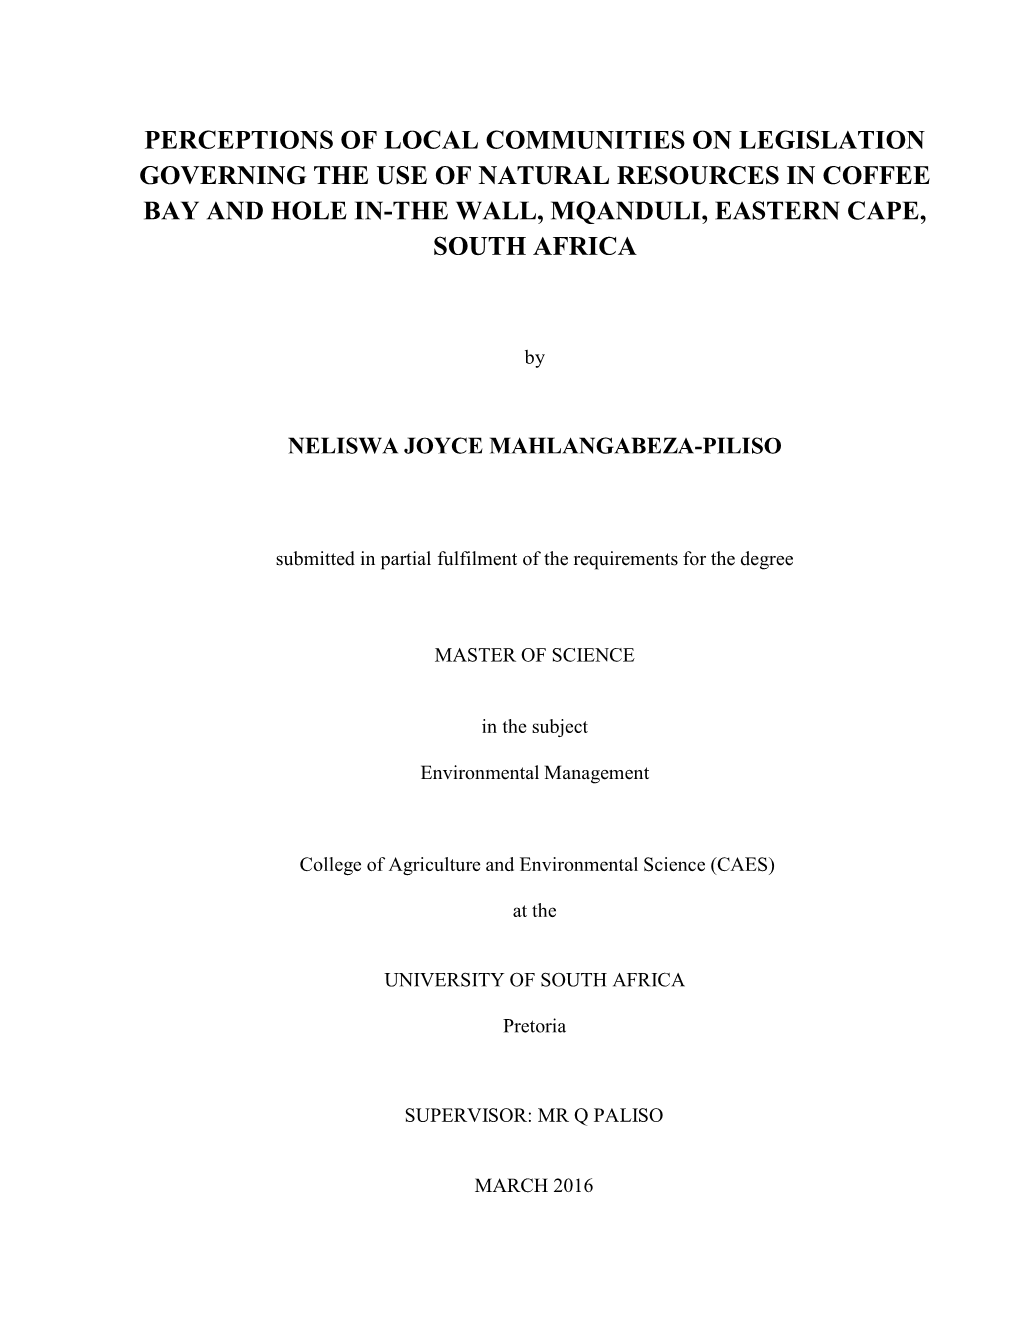 Perceptions of Local Communities on Legislation Governing the Use of Natural Resources in Coffee Bay and Hole In-The Wall, Mqanduli, Eastern Cape, South Africa